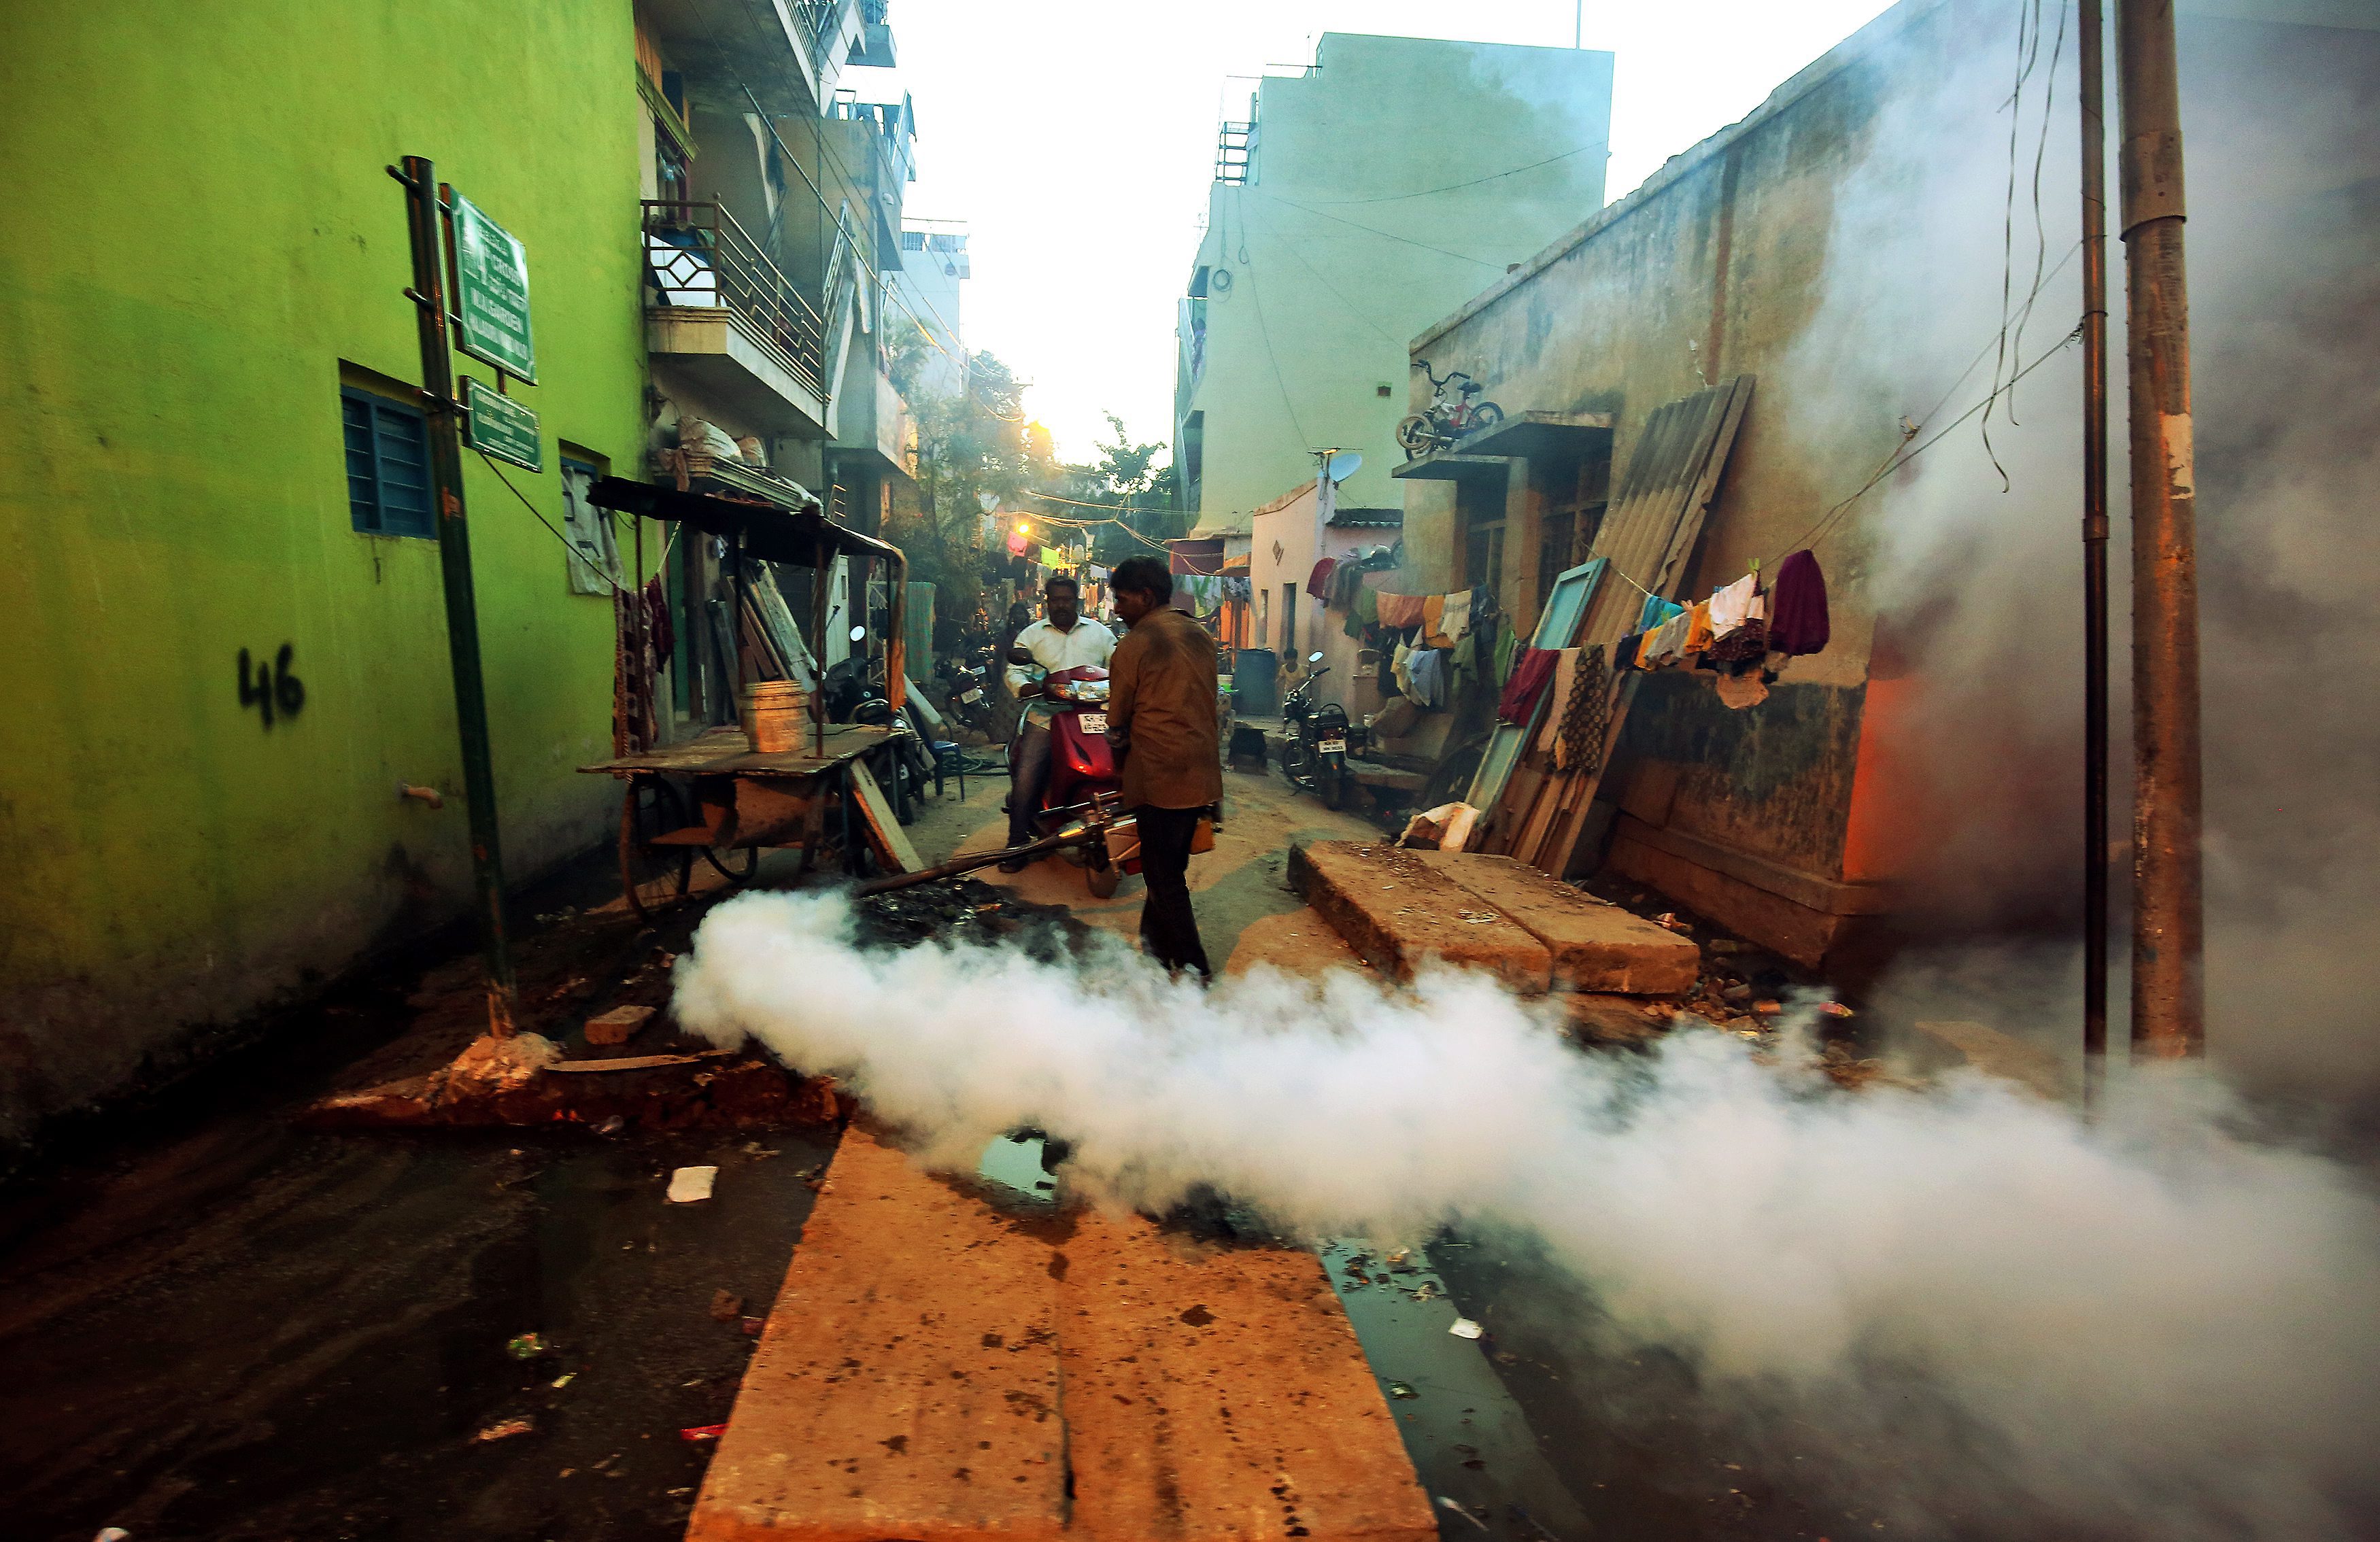 A civic administration worker carries out fumigation to curb mosquito growth in Bangalore, India. Improving access to basic services is on the agenda. Photo: EPA